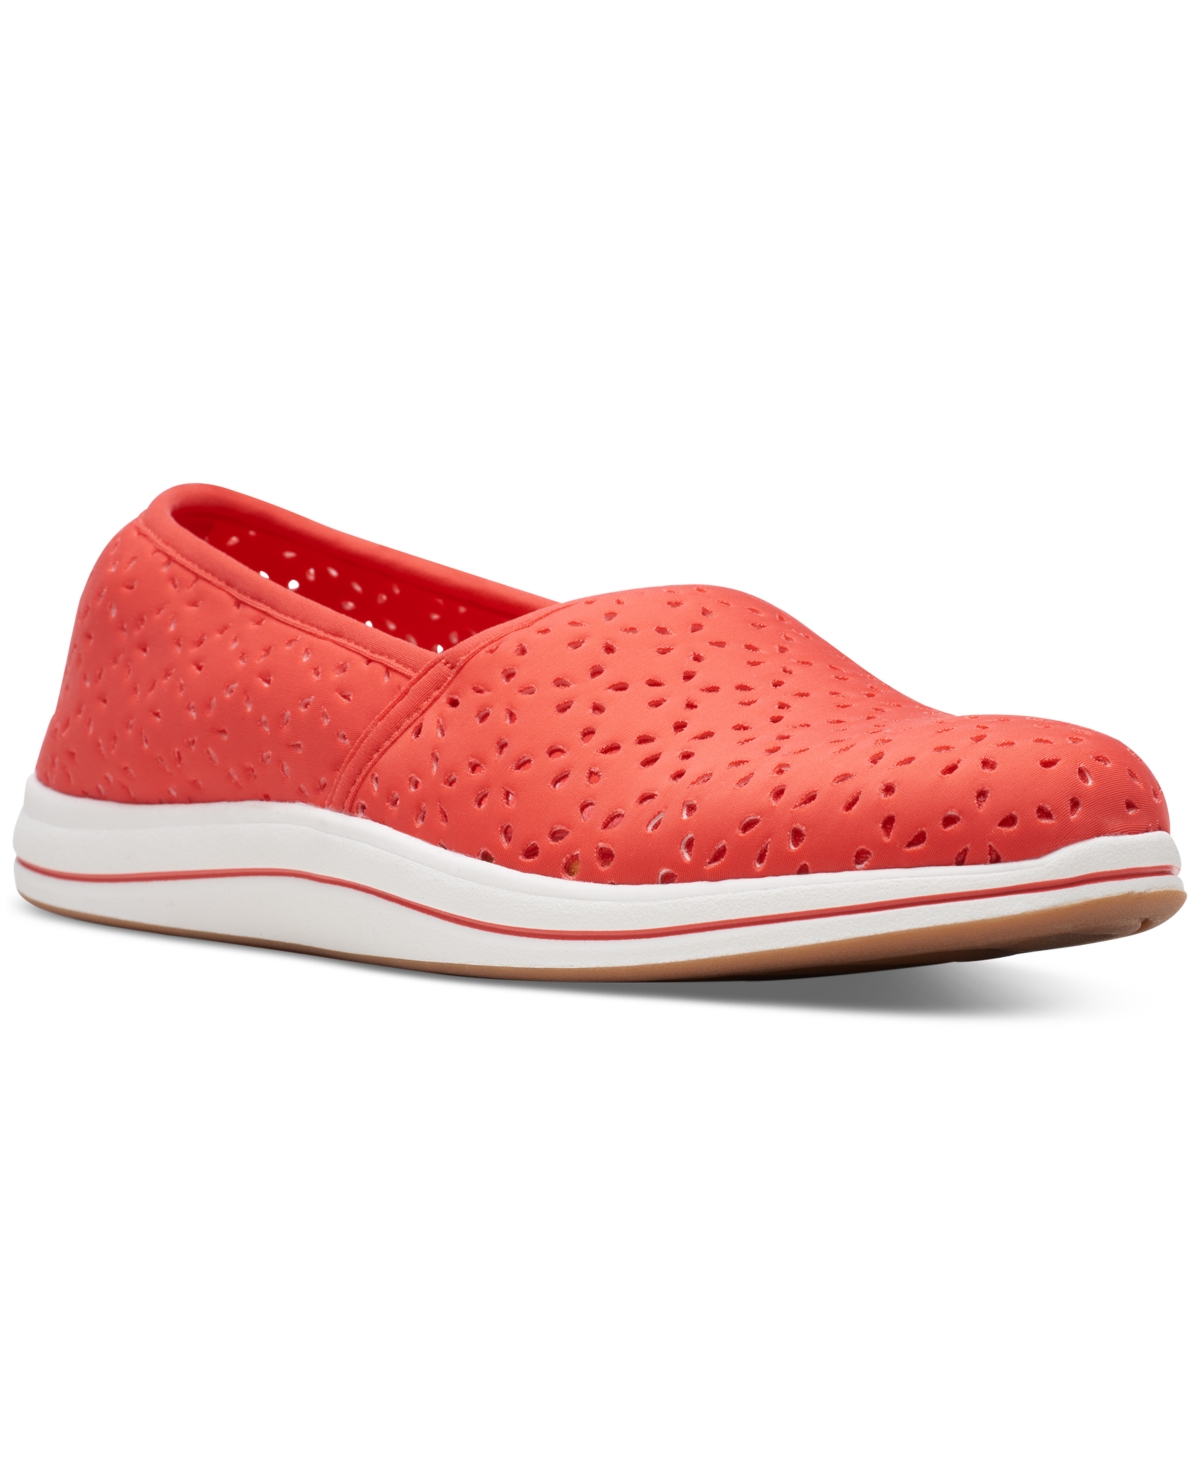 CLARKS WOMEN'S CLOUDSTEPPERS BREEZE EMILY PERFORATED LOAFER FLATS